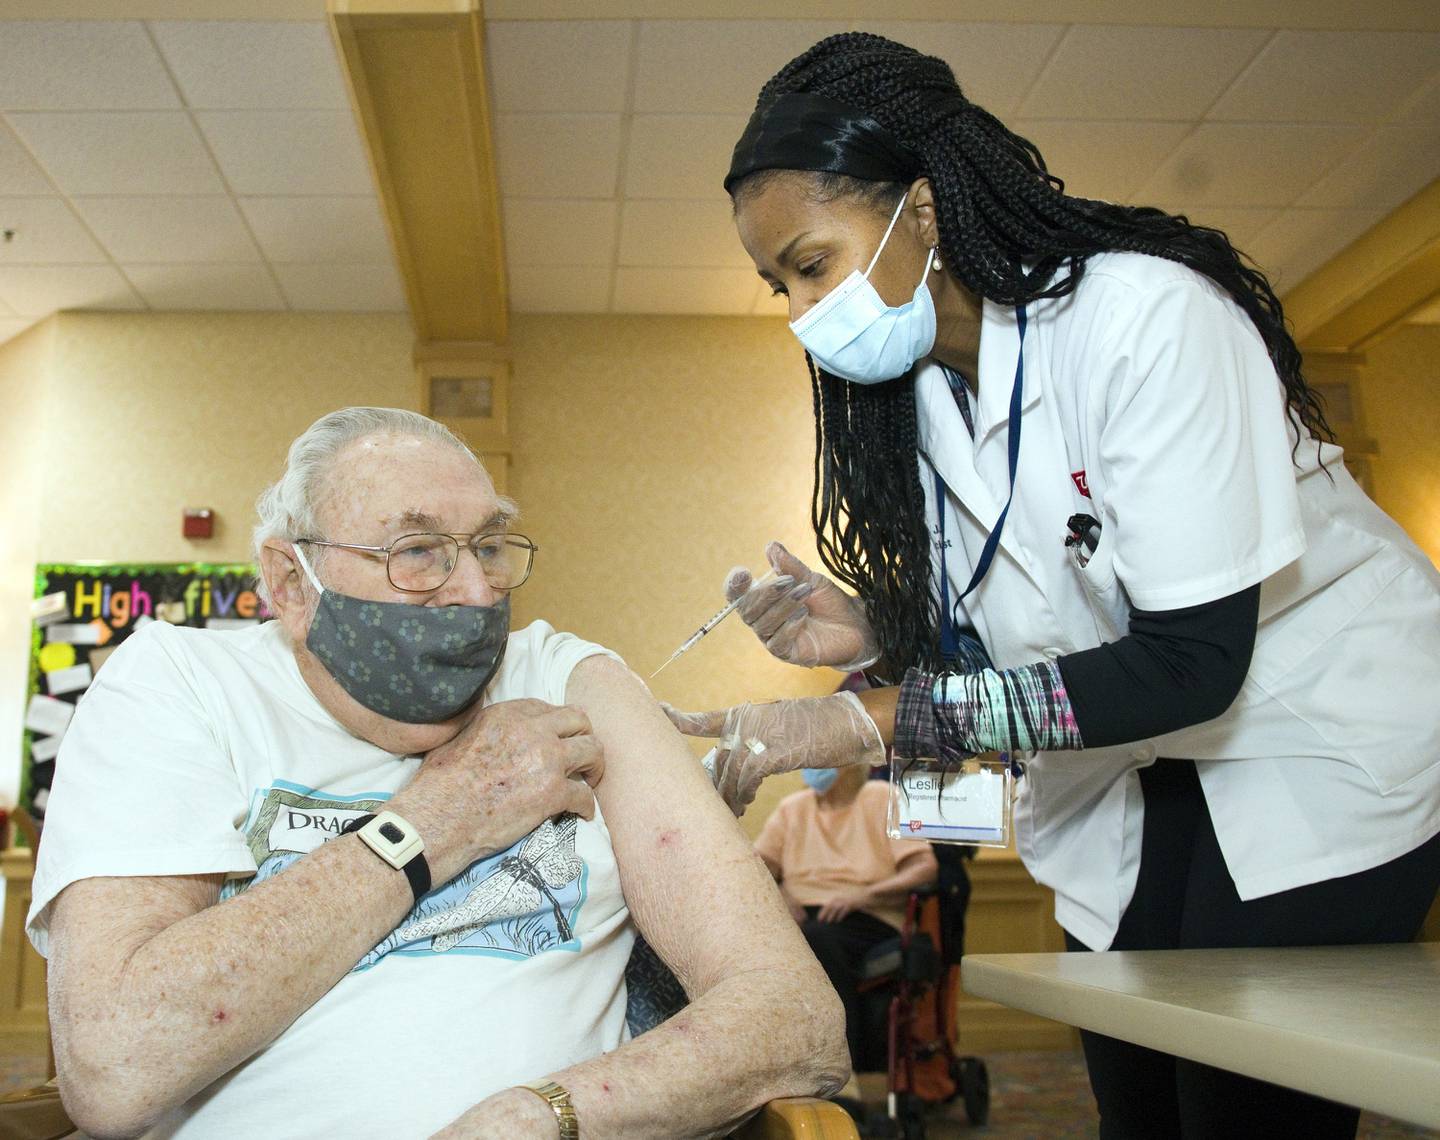 John Gregg, a resident of the Timbers of Shorewood, receives the COVID-19 vaccine from Walgreens Pharmacists Leslie Jones-Hunter at Timbers of Shorewood on January 7, 2021, in Shorewood, Ill.